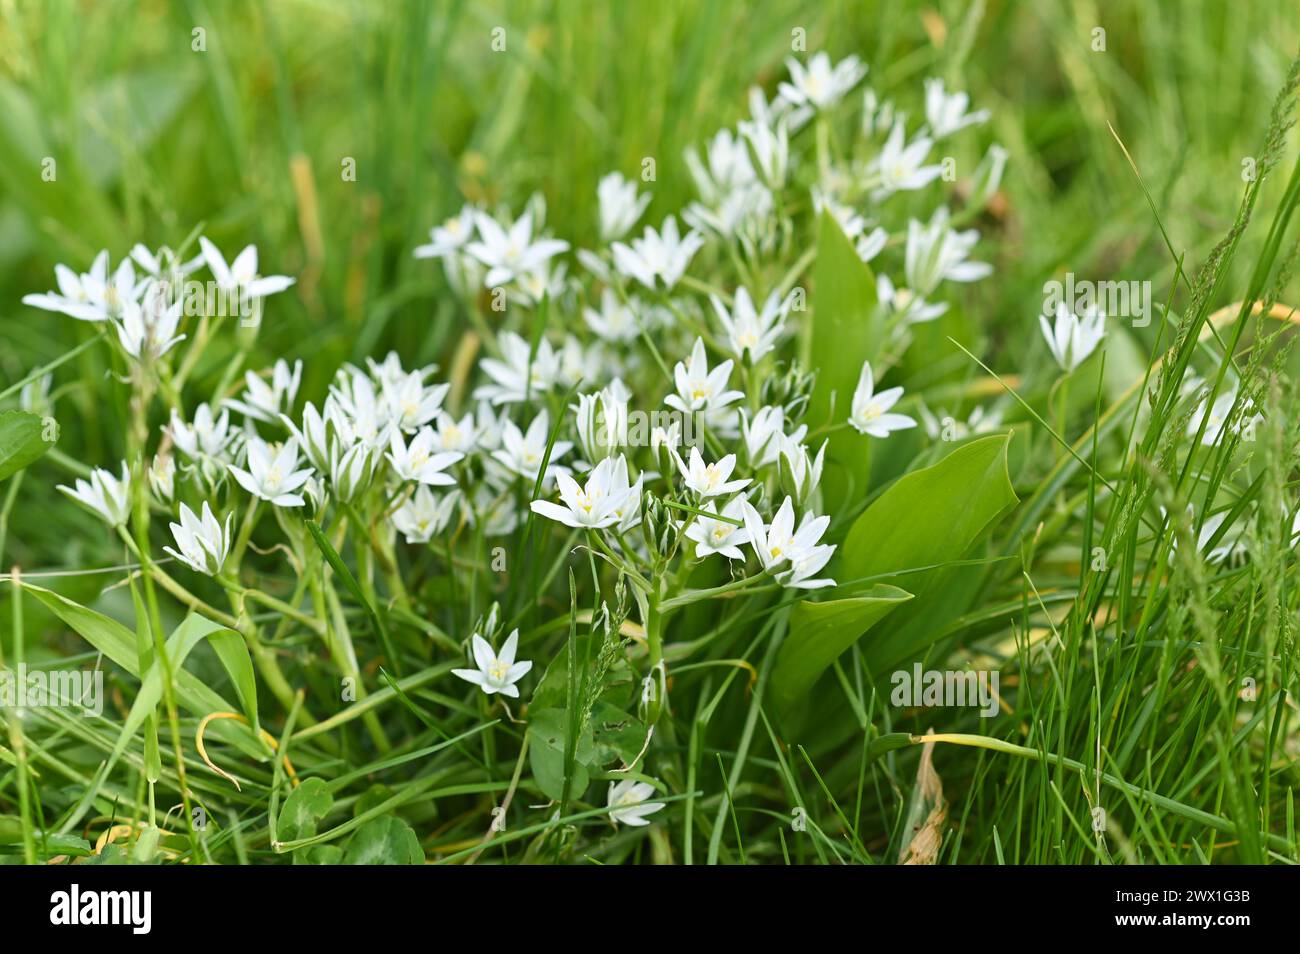 A spring floral background of white ornithogalum flowers. Stock Photo